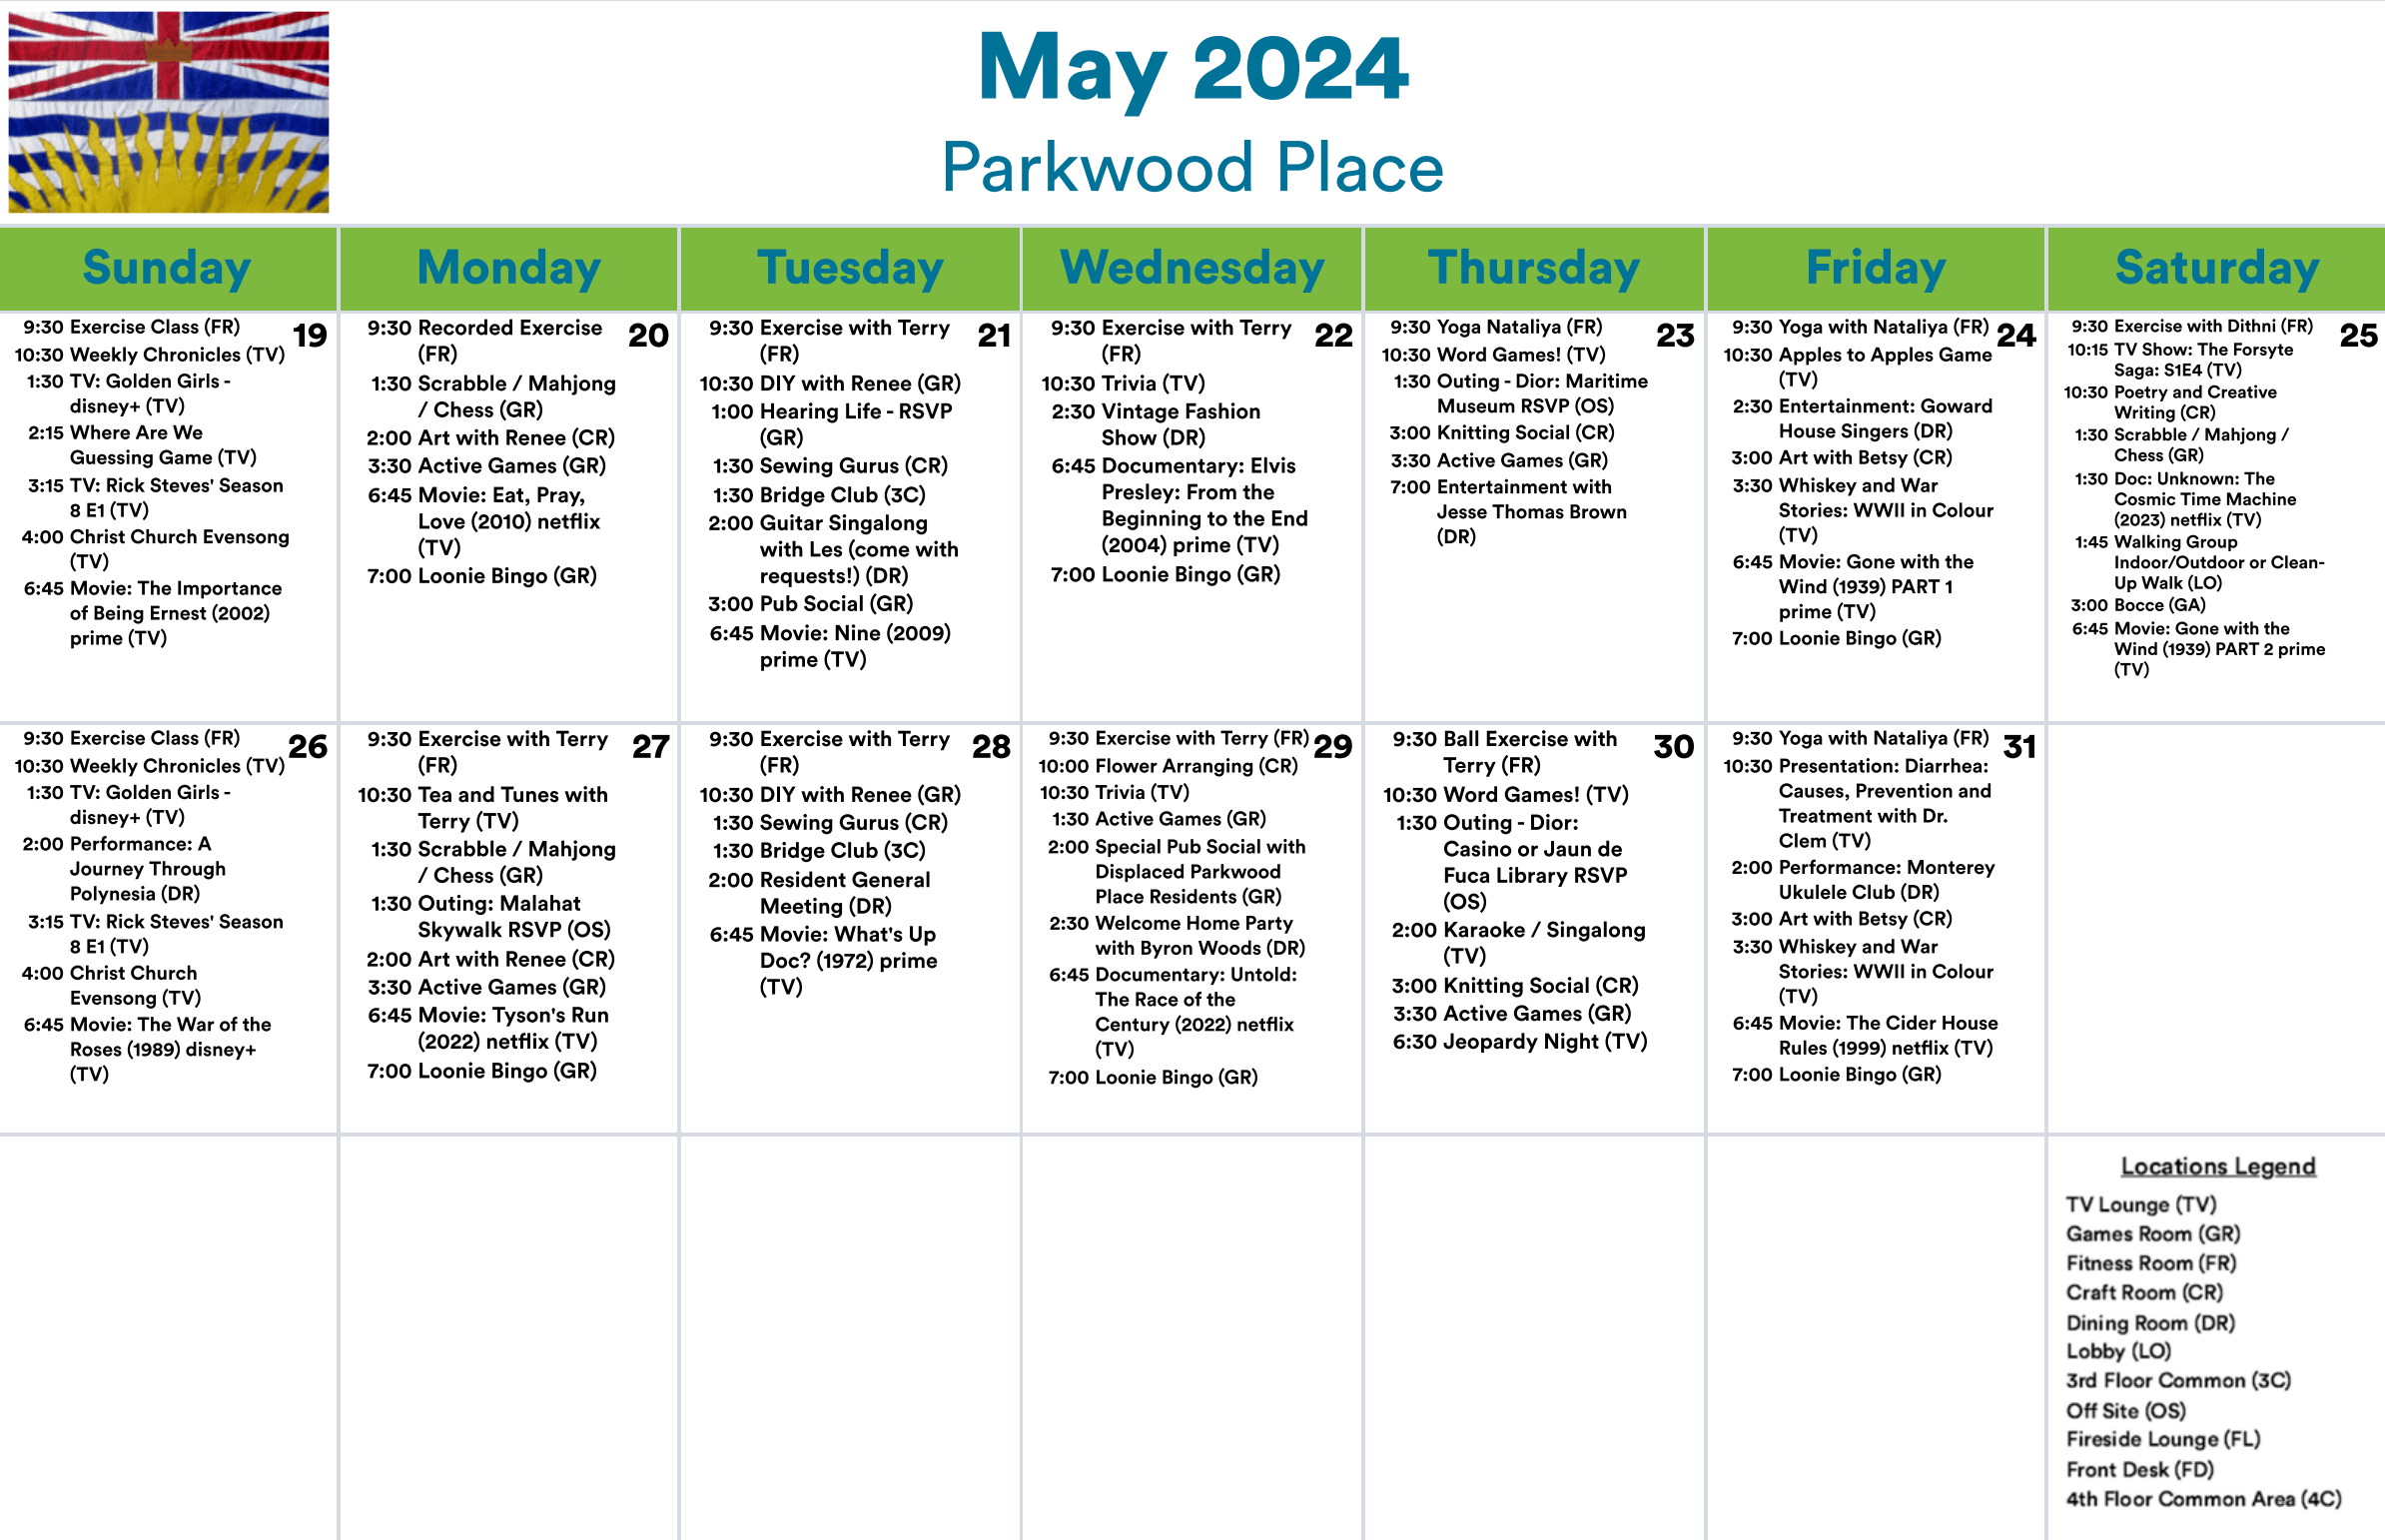 Parkwood Place May 19 - 31 2024 event calendar